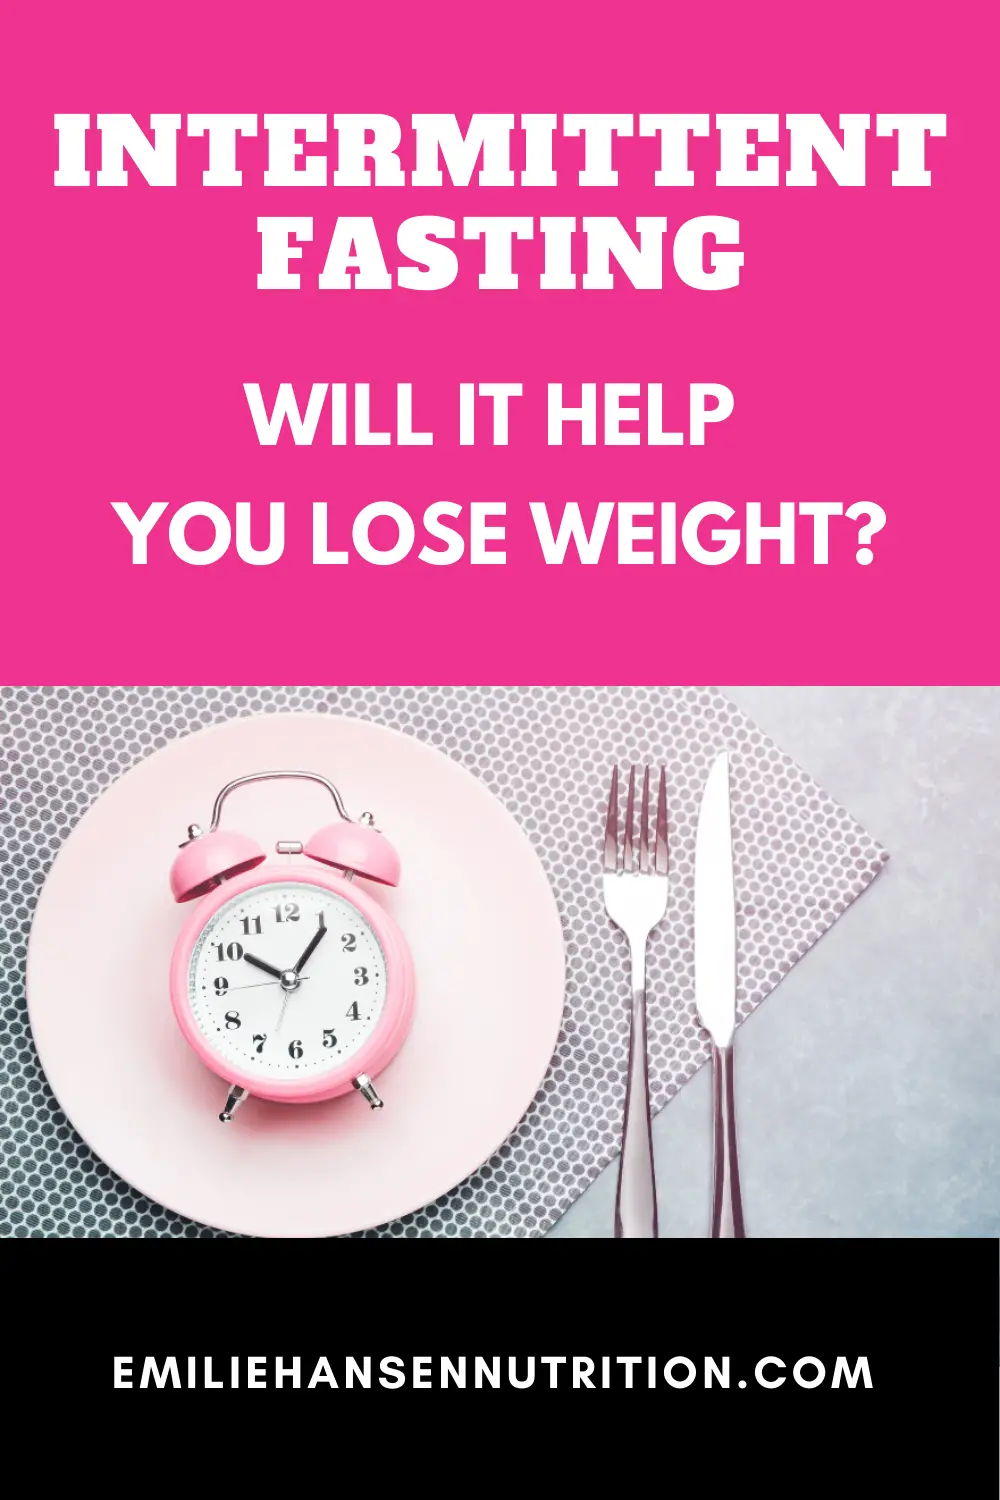 Will Intermittent Fasting Help You Lose Weight?